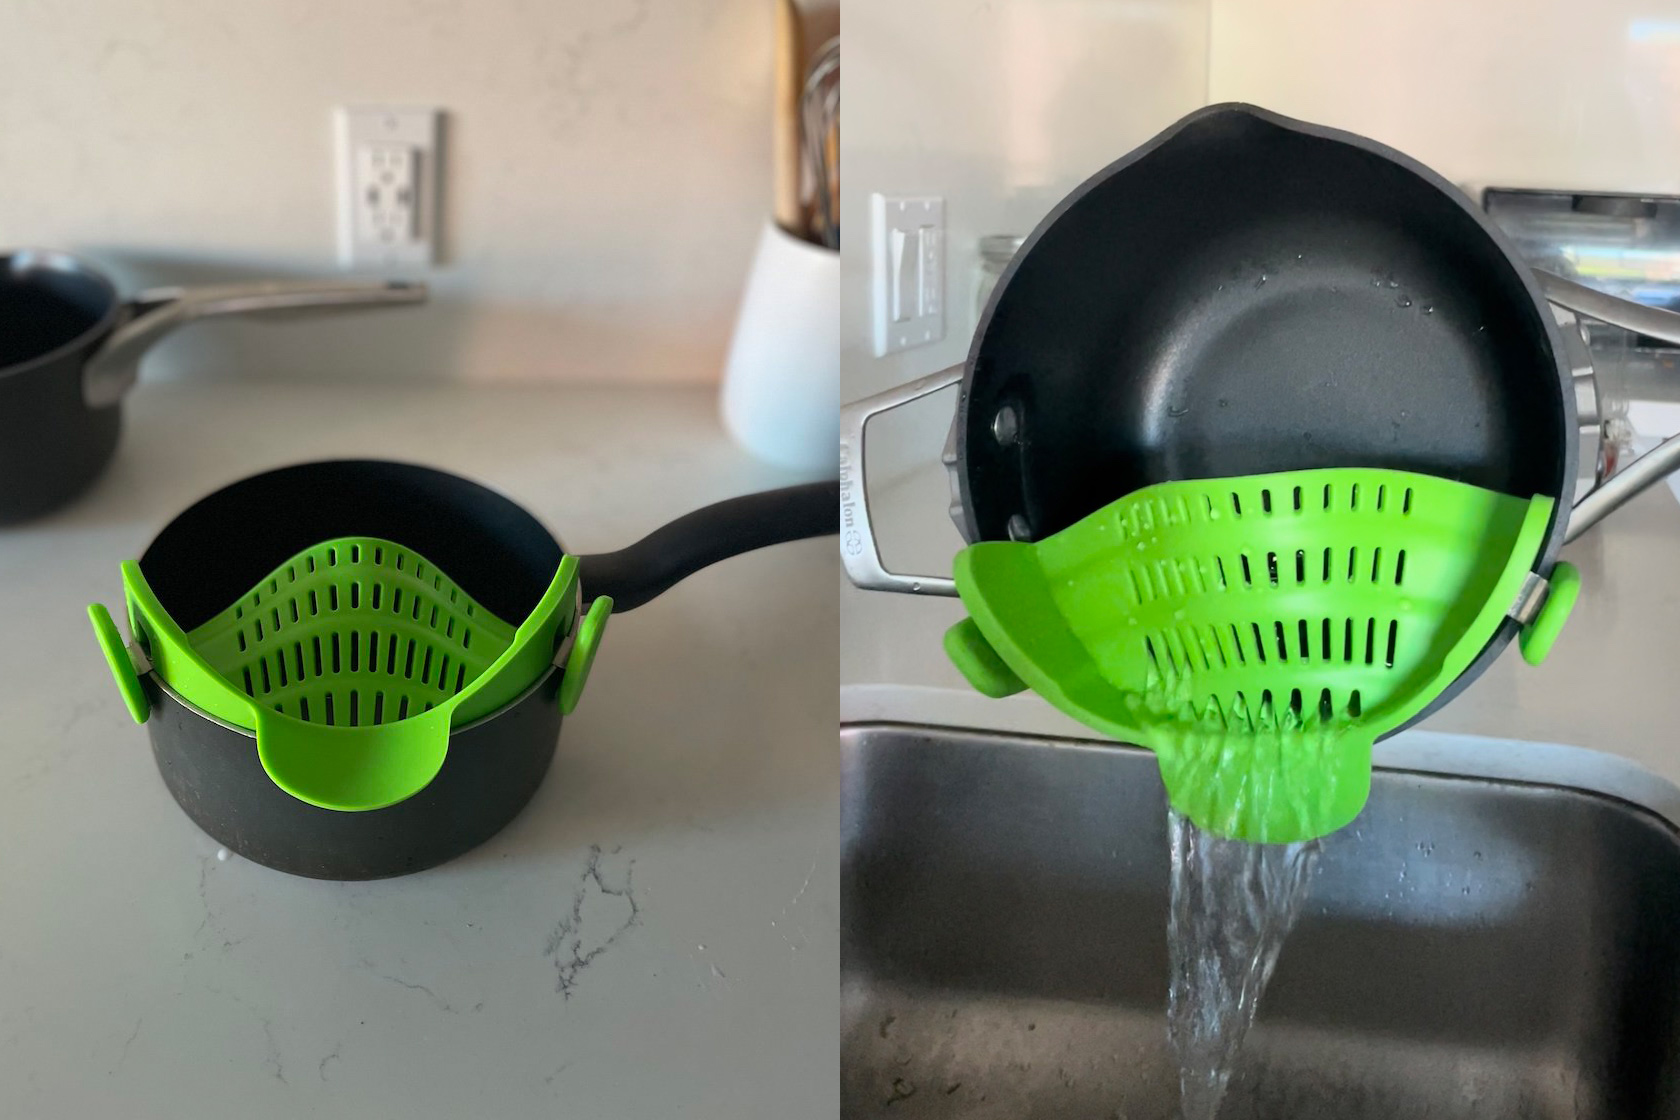 Kitchen Gizmo Snap N Strain Pot Strainer and Pasta Strainer - Adjustable  Silicone Clip On Strainer for Pots, Pans, and Bowls - Lime Green